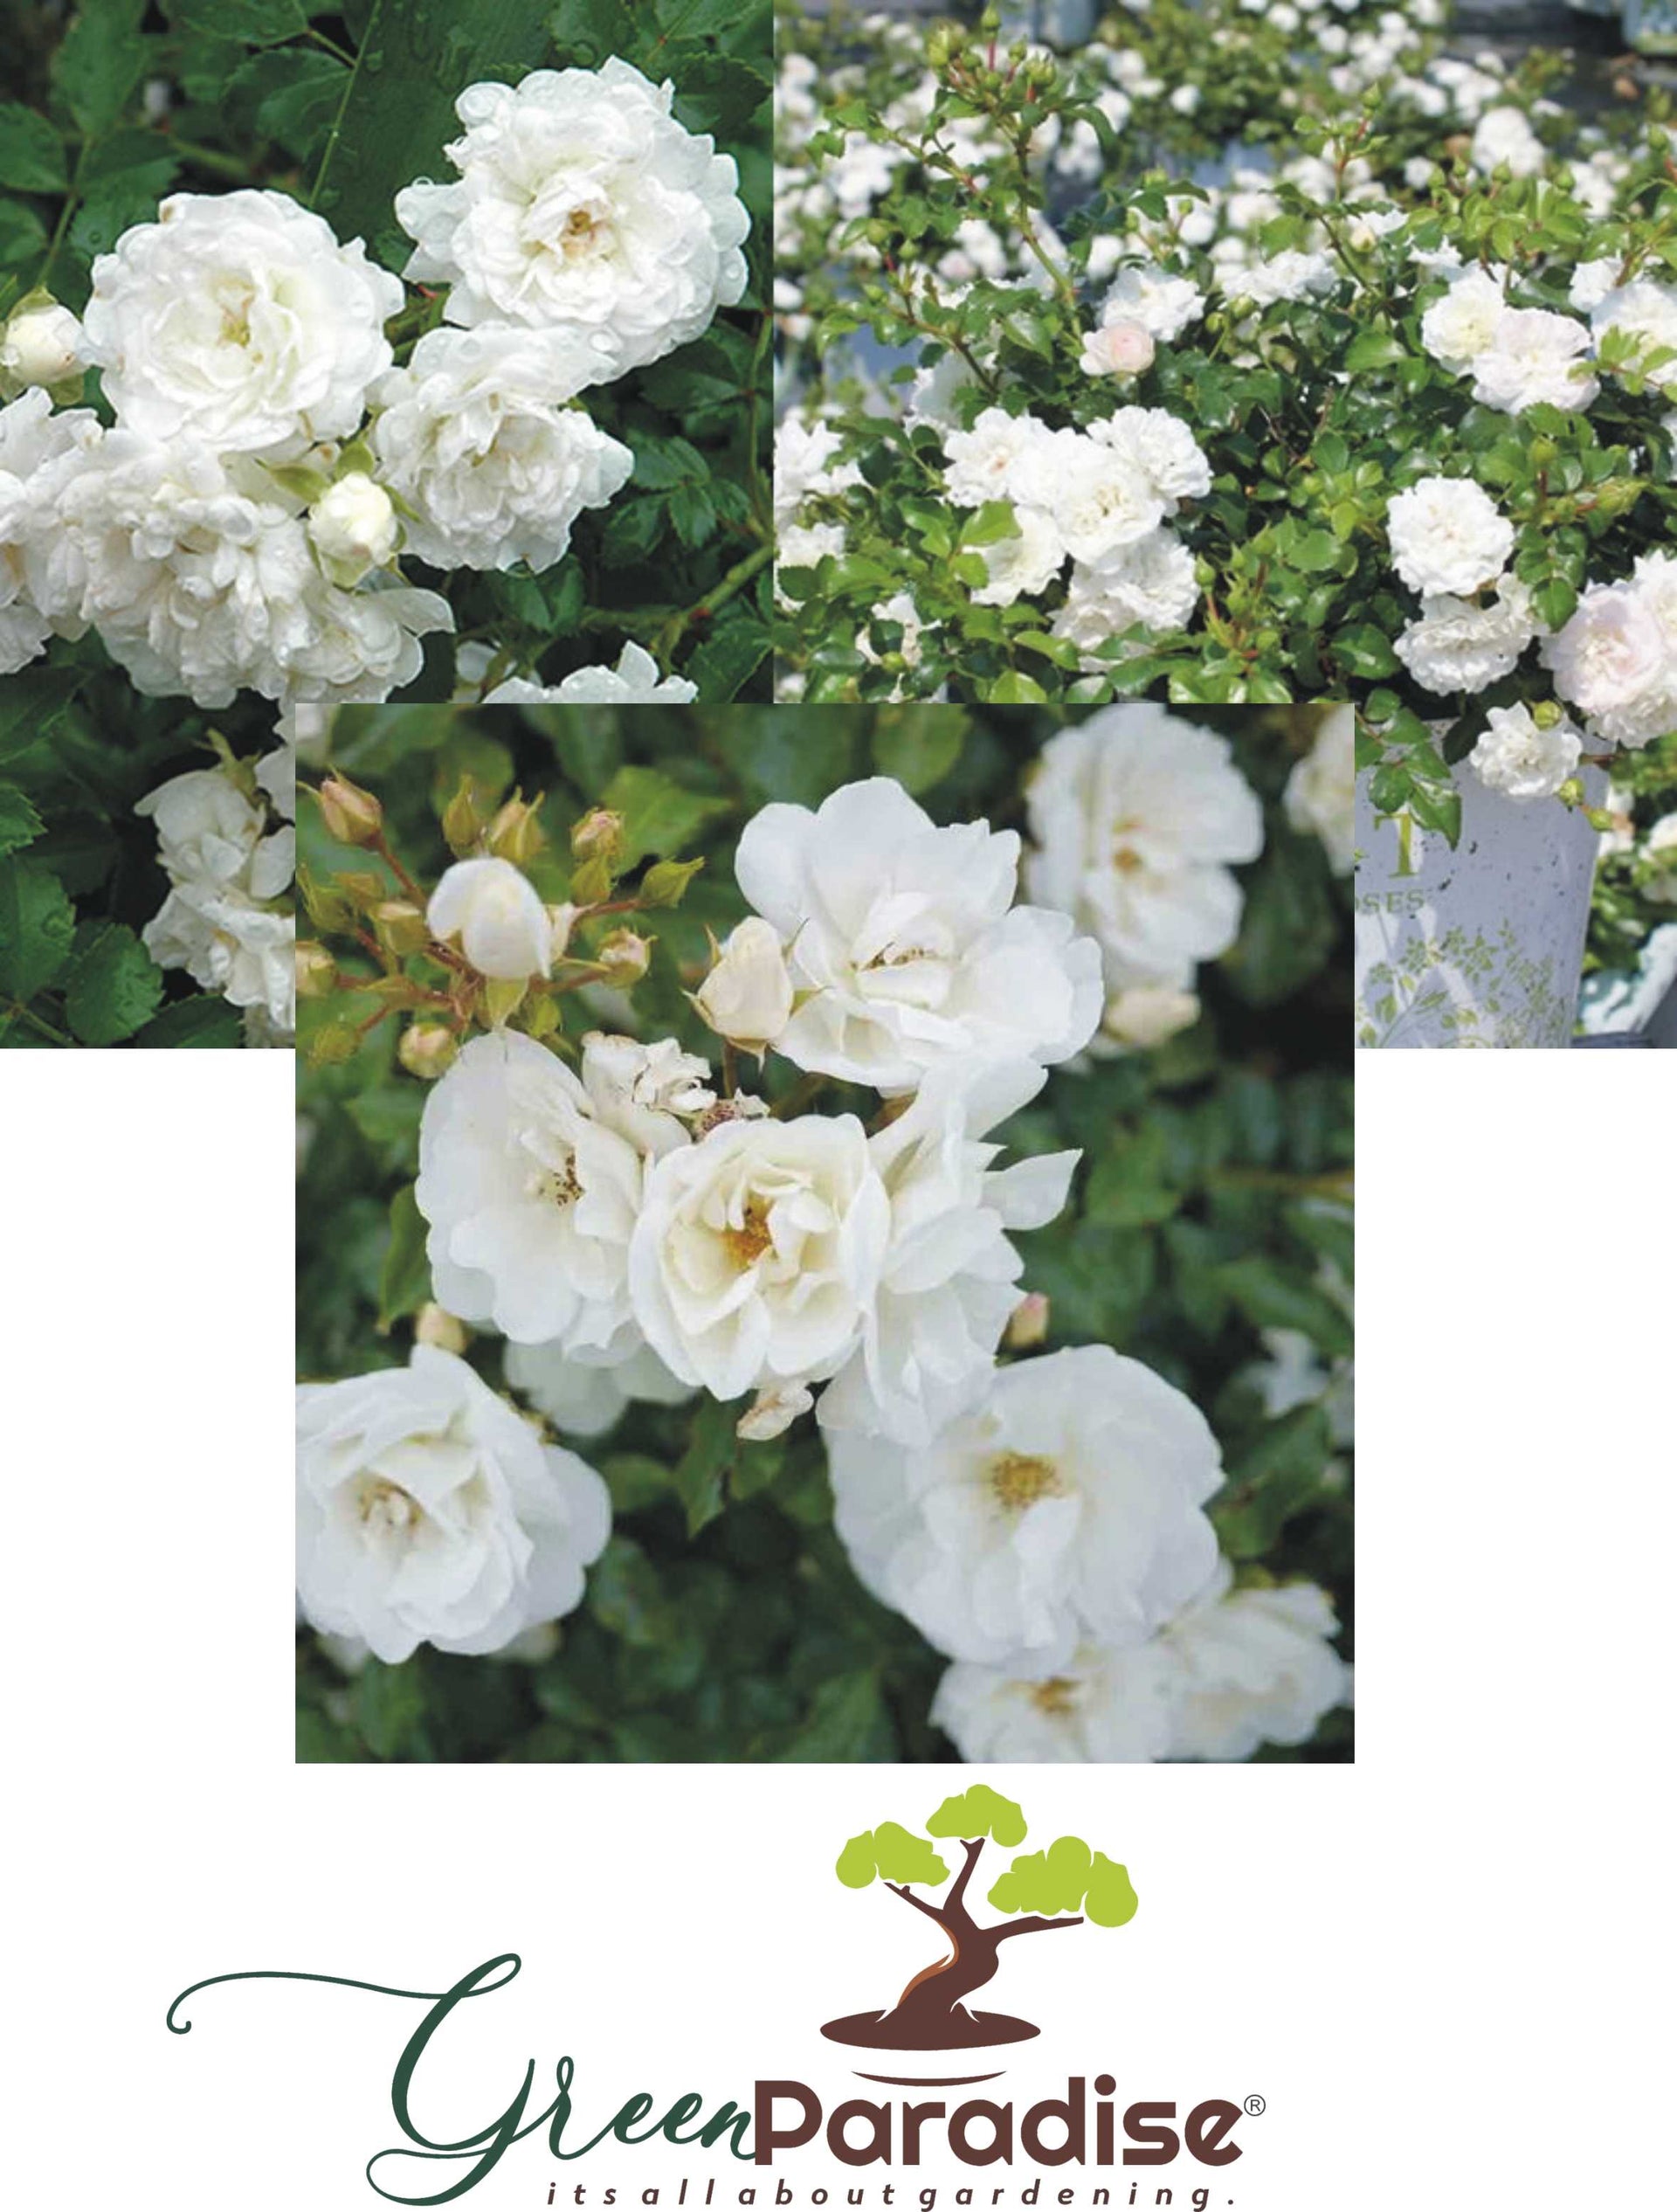 Summersnow Rose Bunch Roses Throneless Roses Plant